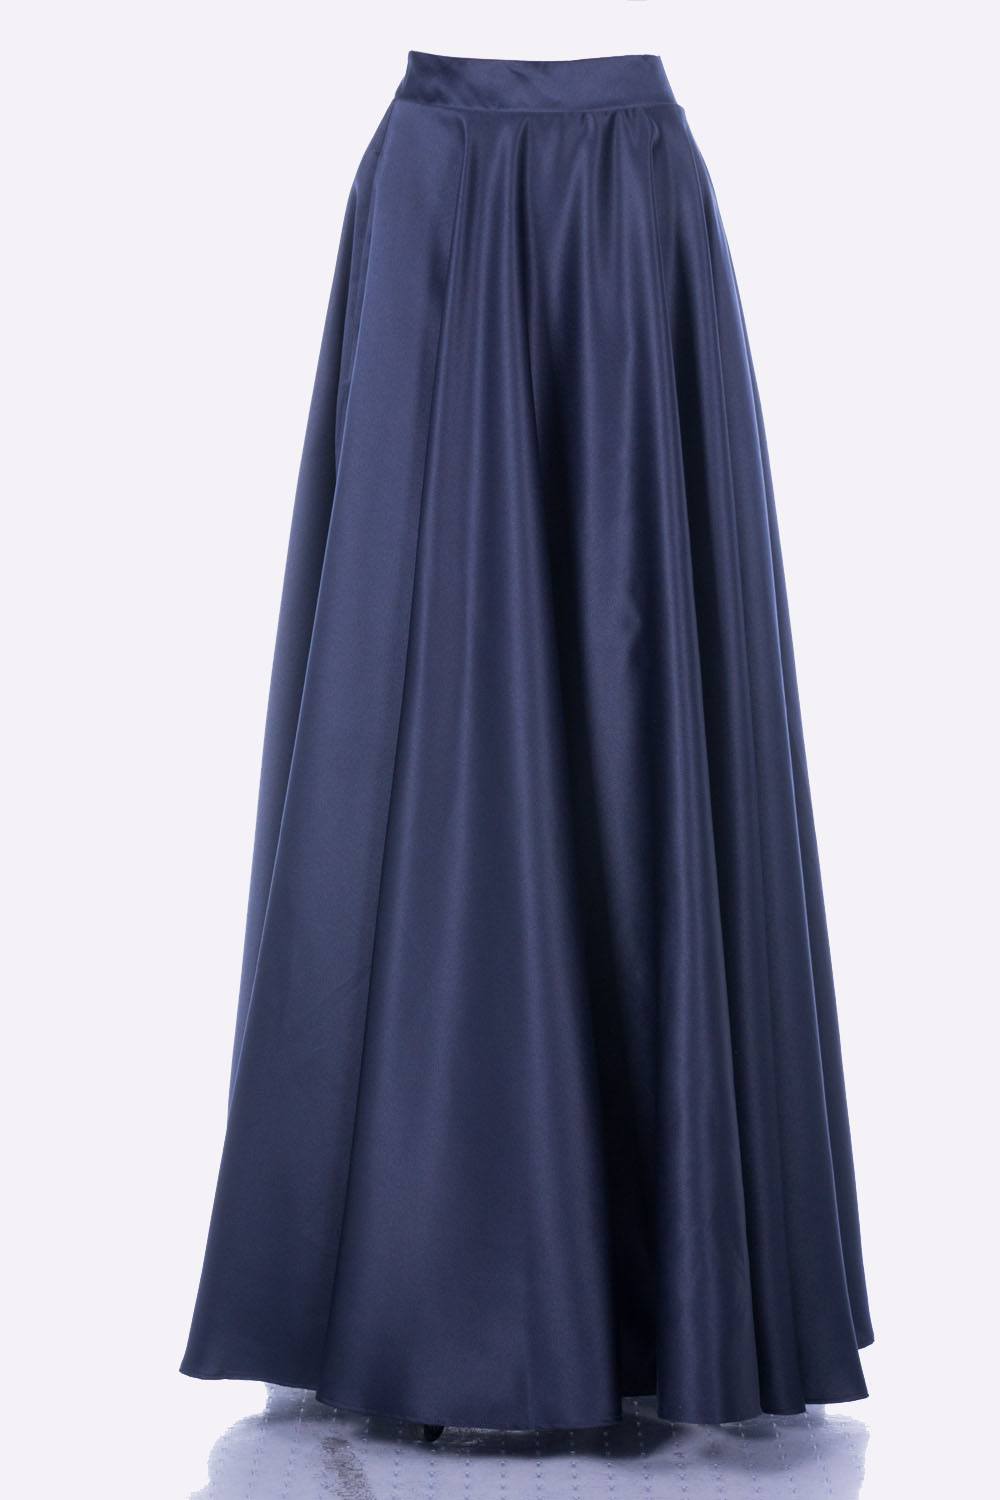 Poly USA SK10 Long Satin Skirt With Side Pockets - Navy Blue / L